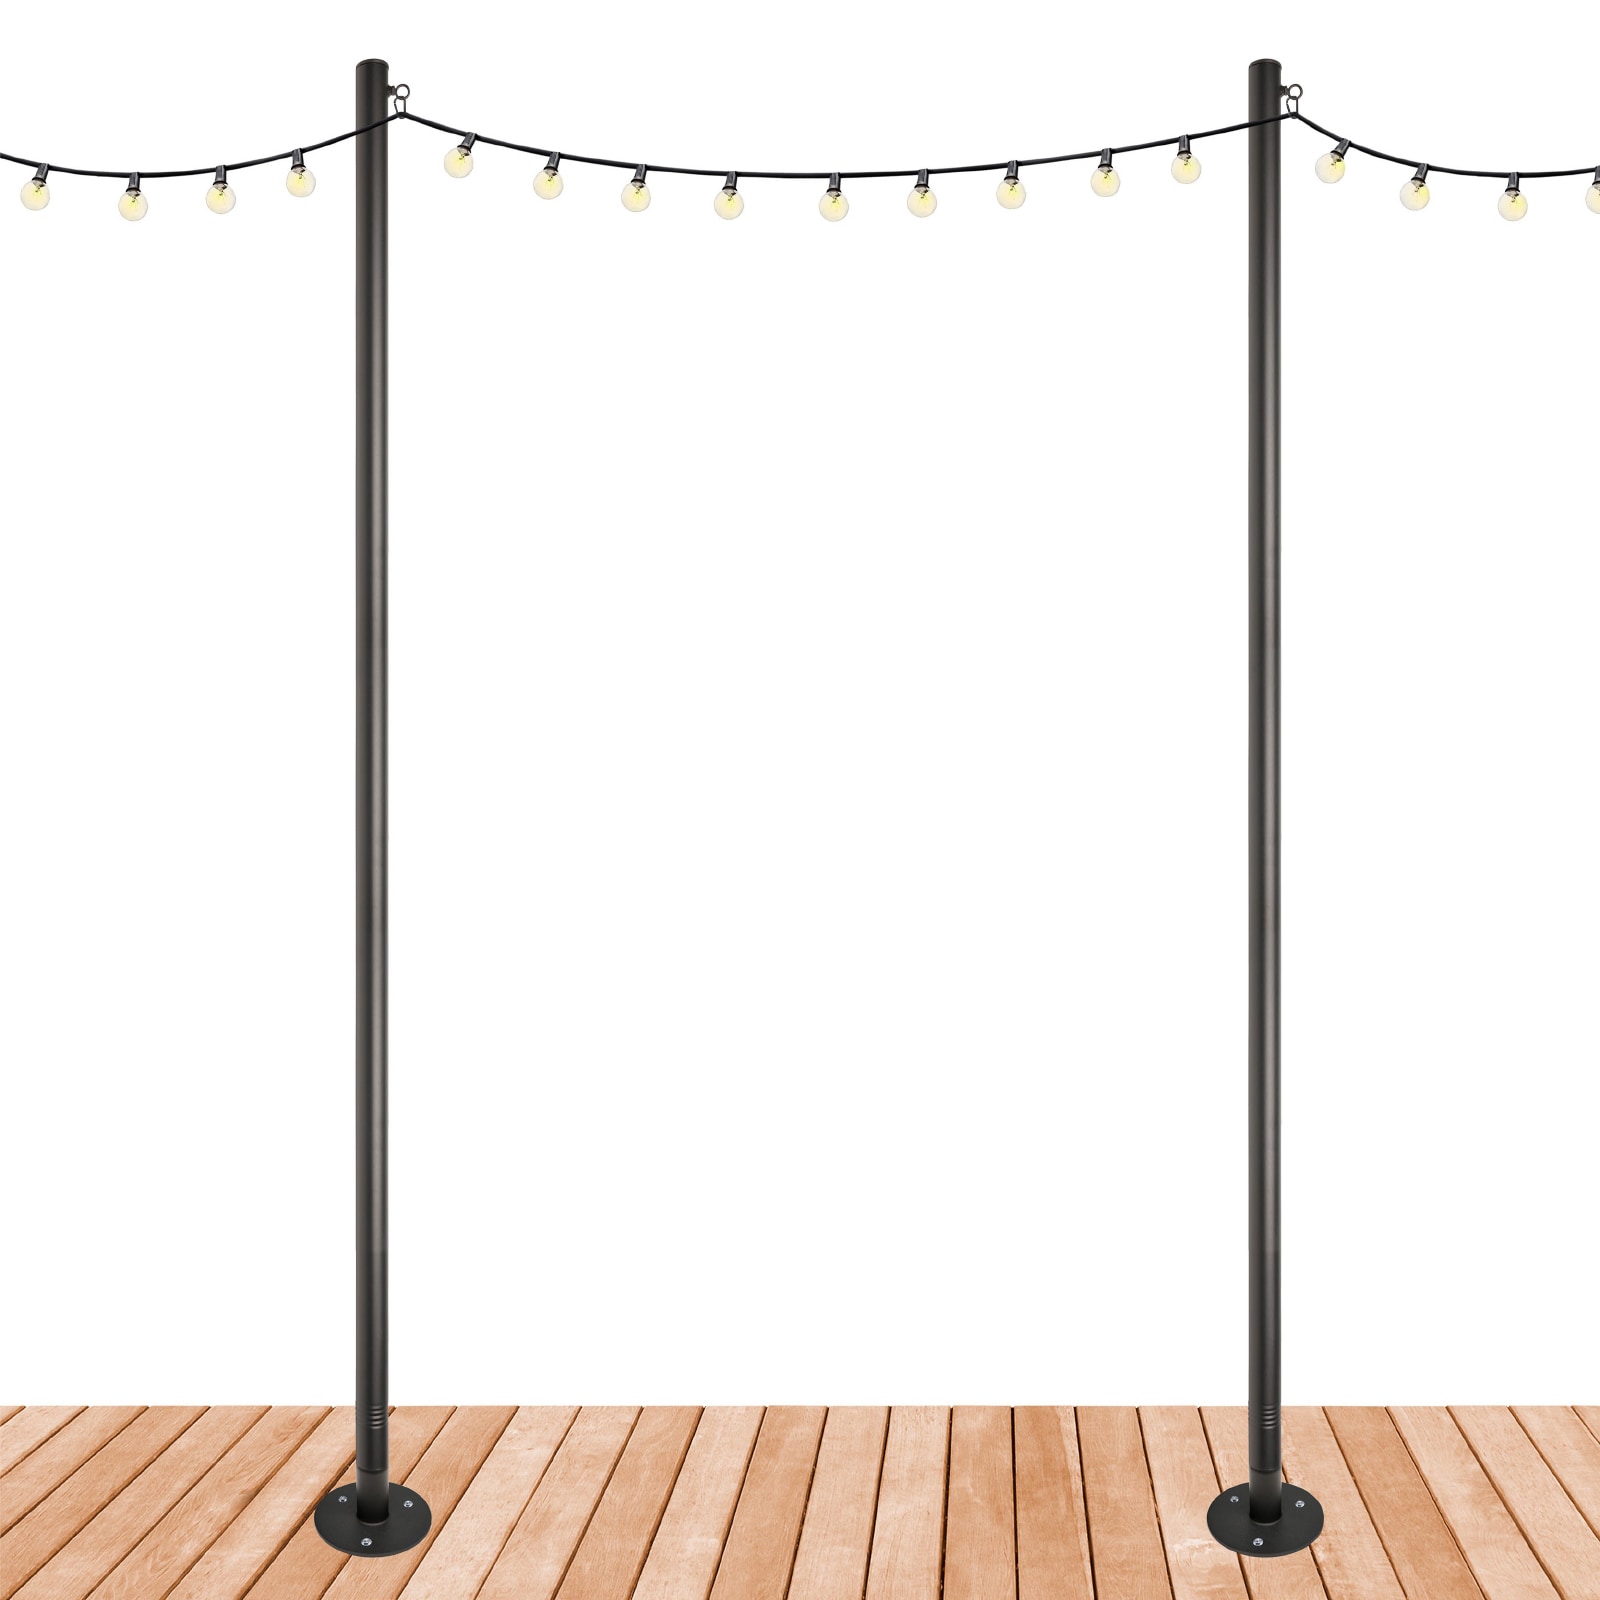 Excello Global Products Premium String Light Poles- 2 Pack 